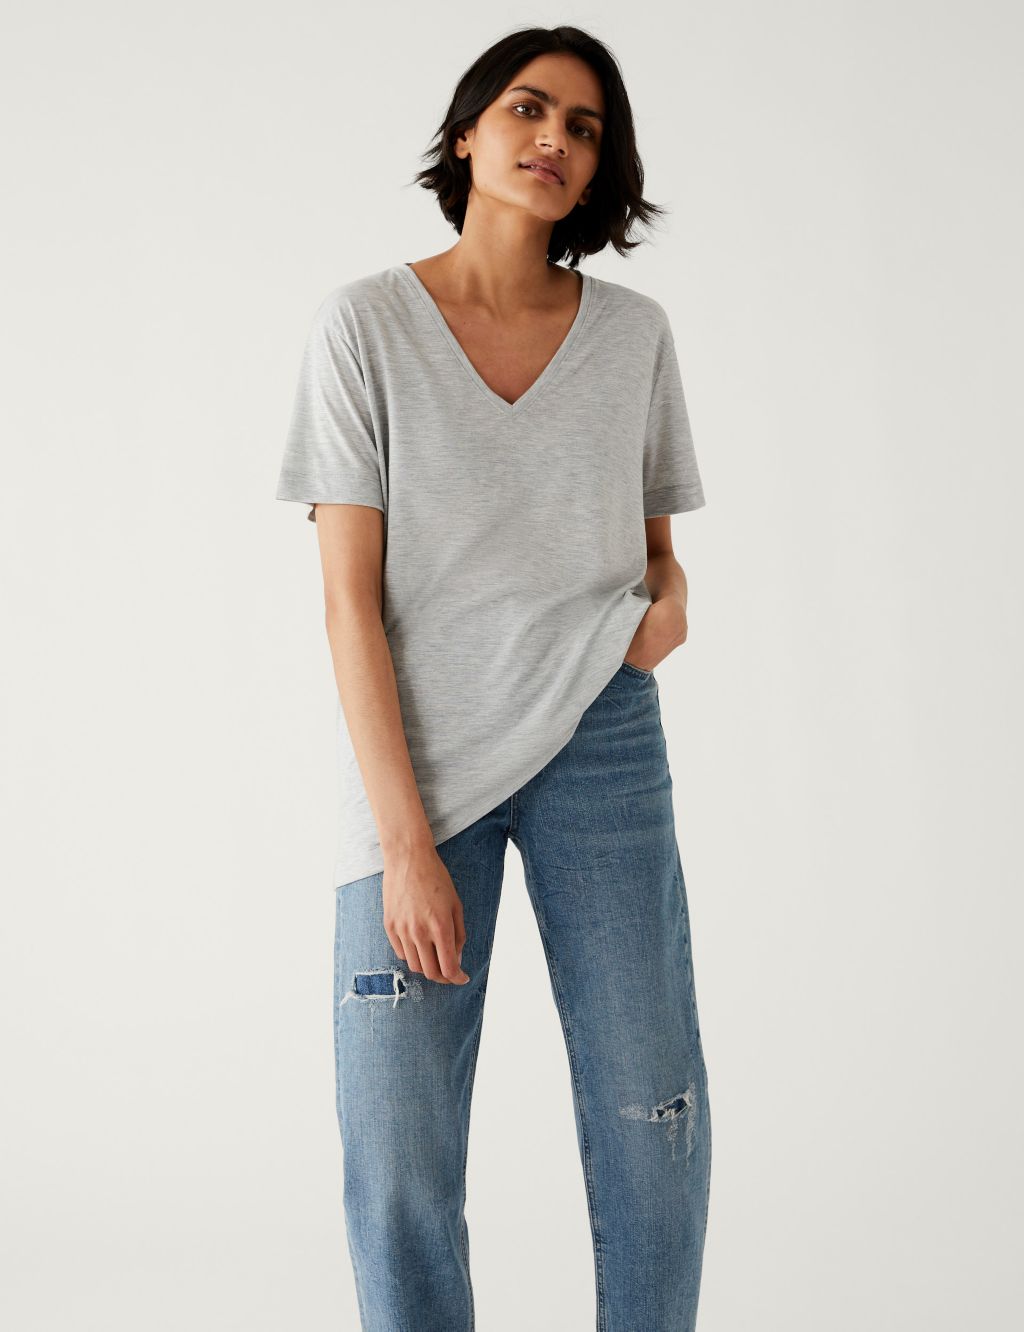 Relaxed Longline T-Shirt image 4